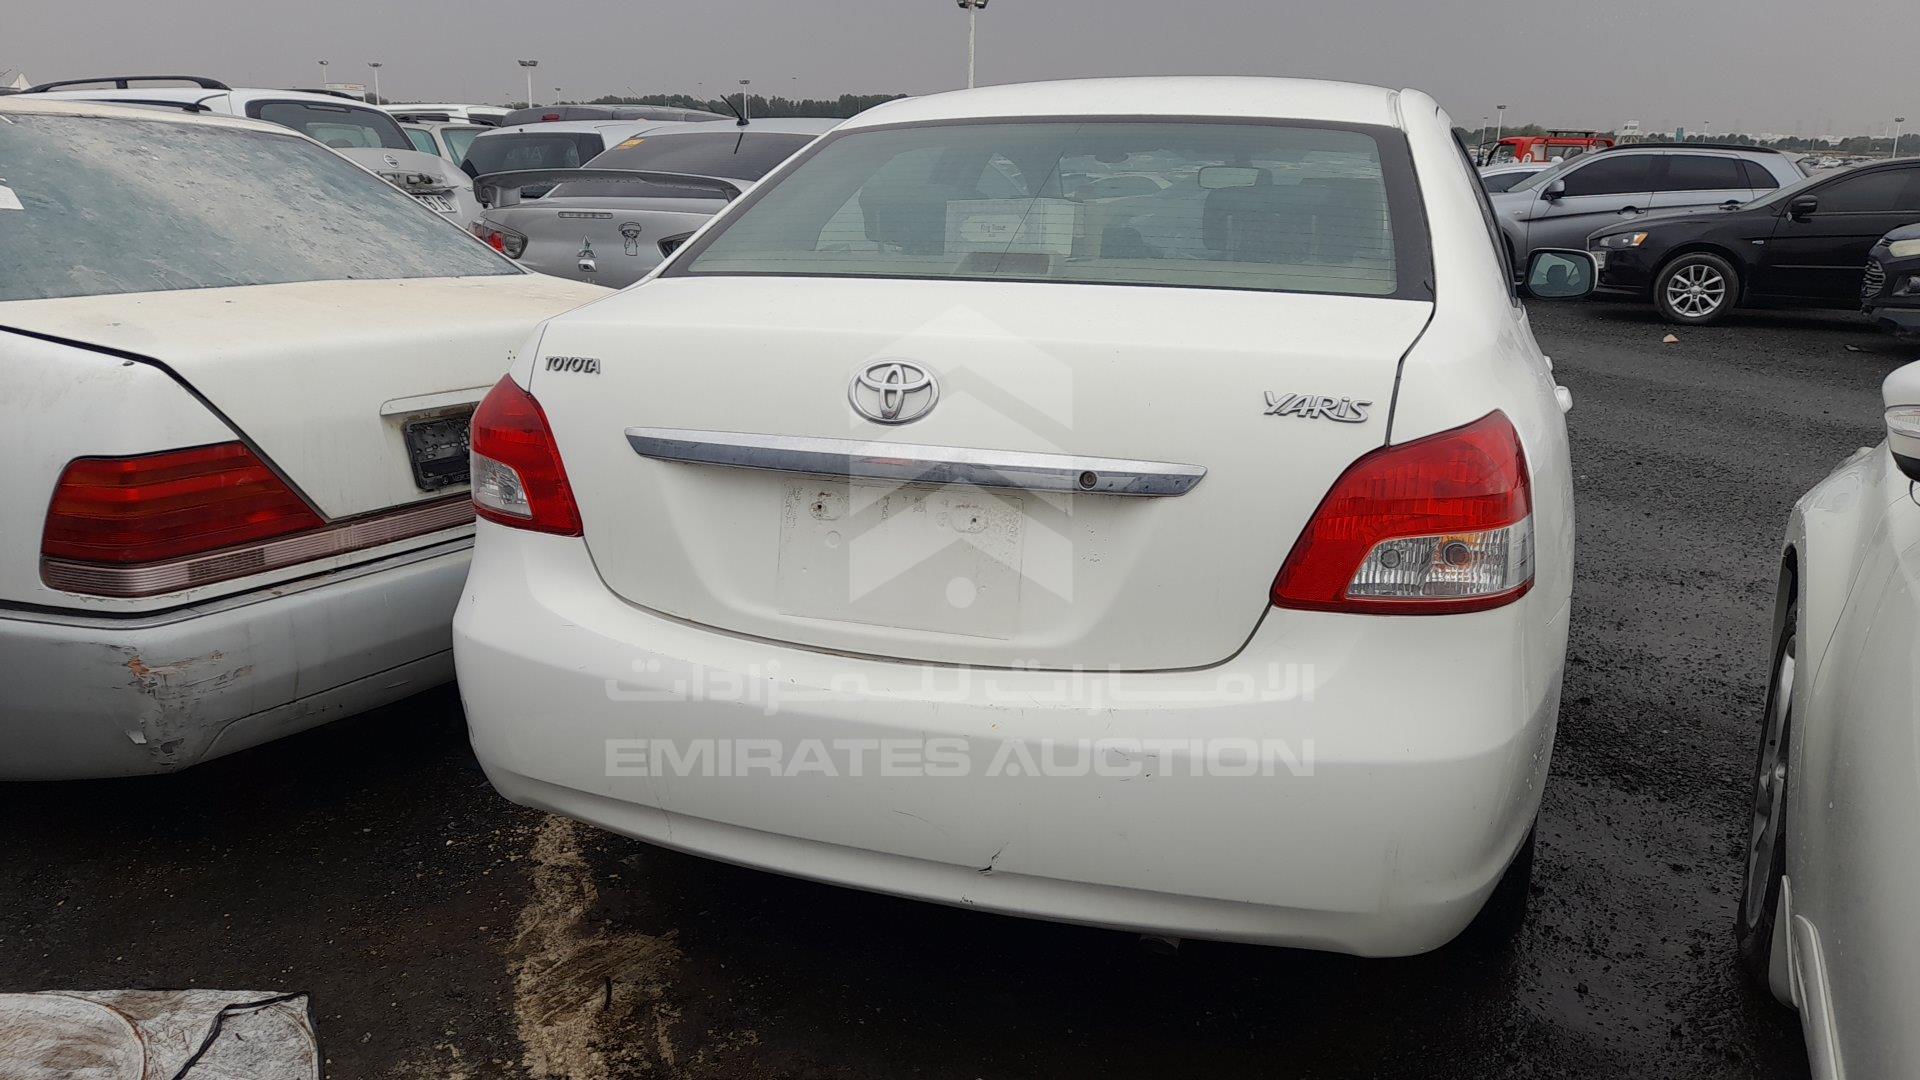 more than 1000 used cars in emirates auction